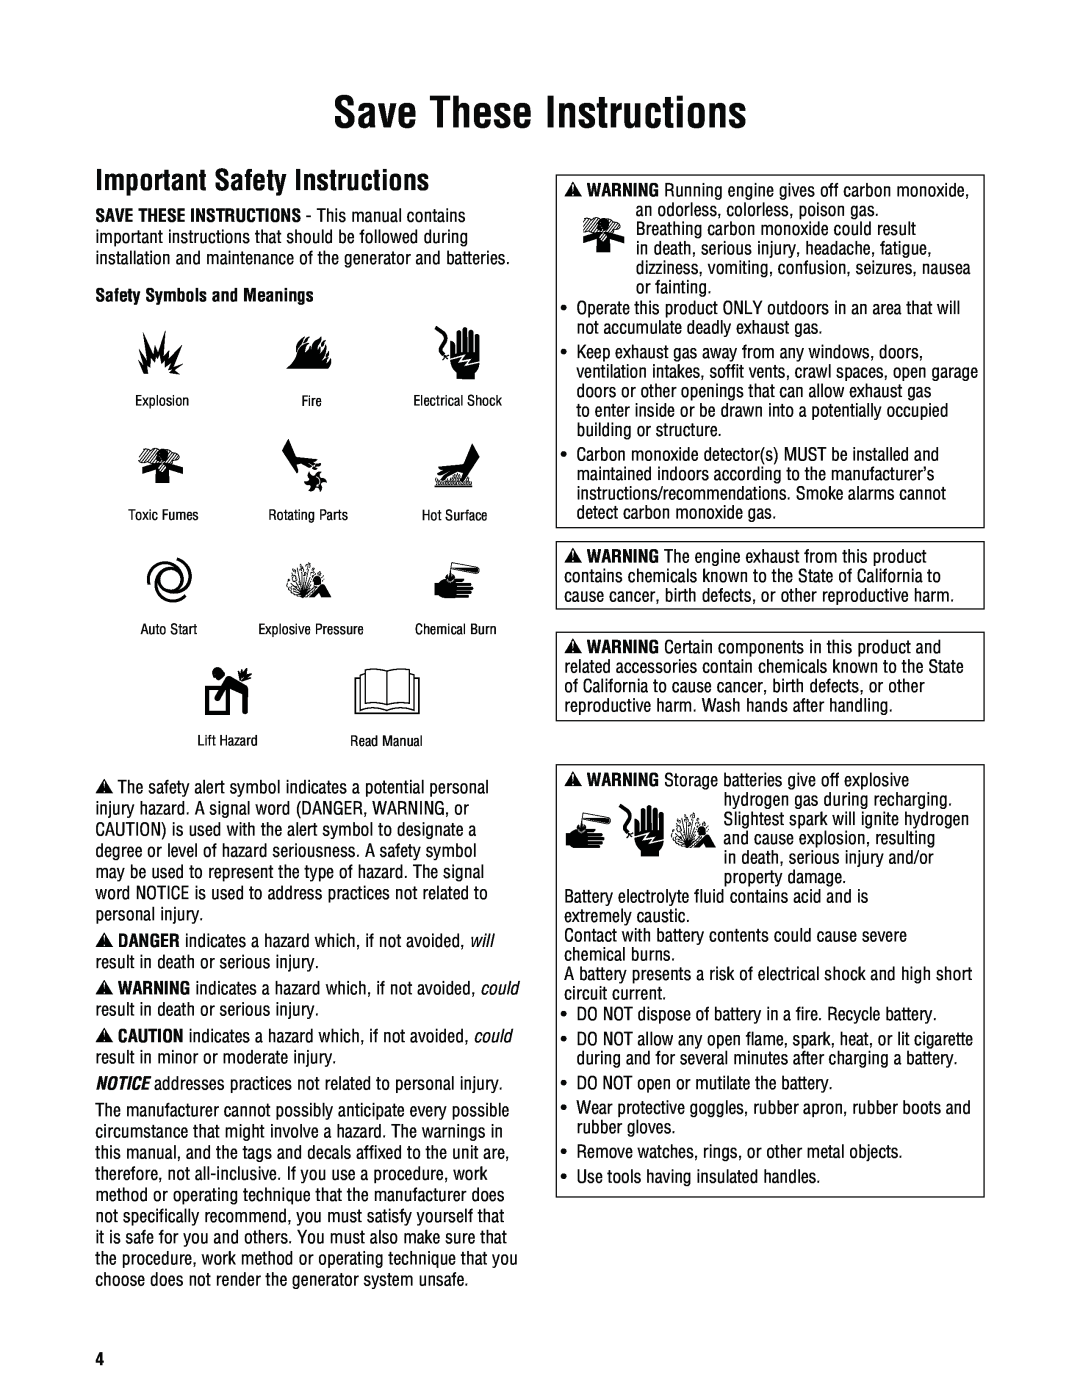 Rheem GEN20AD-E, GEN16AD-E, GEN15ADC-E Save These Instructions, Important Safety Instructions, Safety Symbols and Meanings 